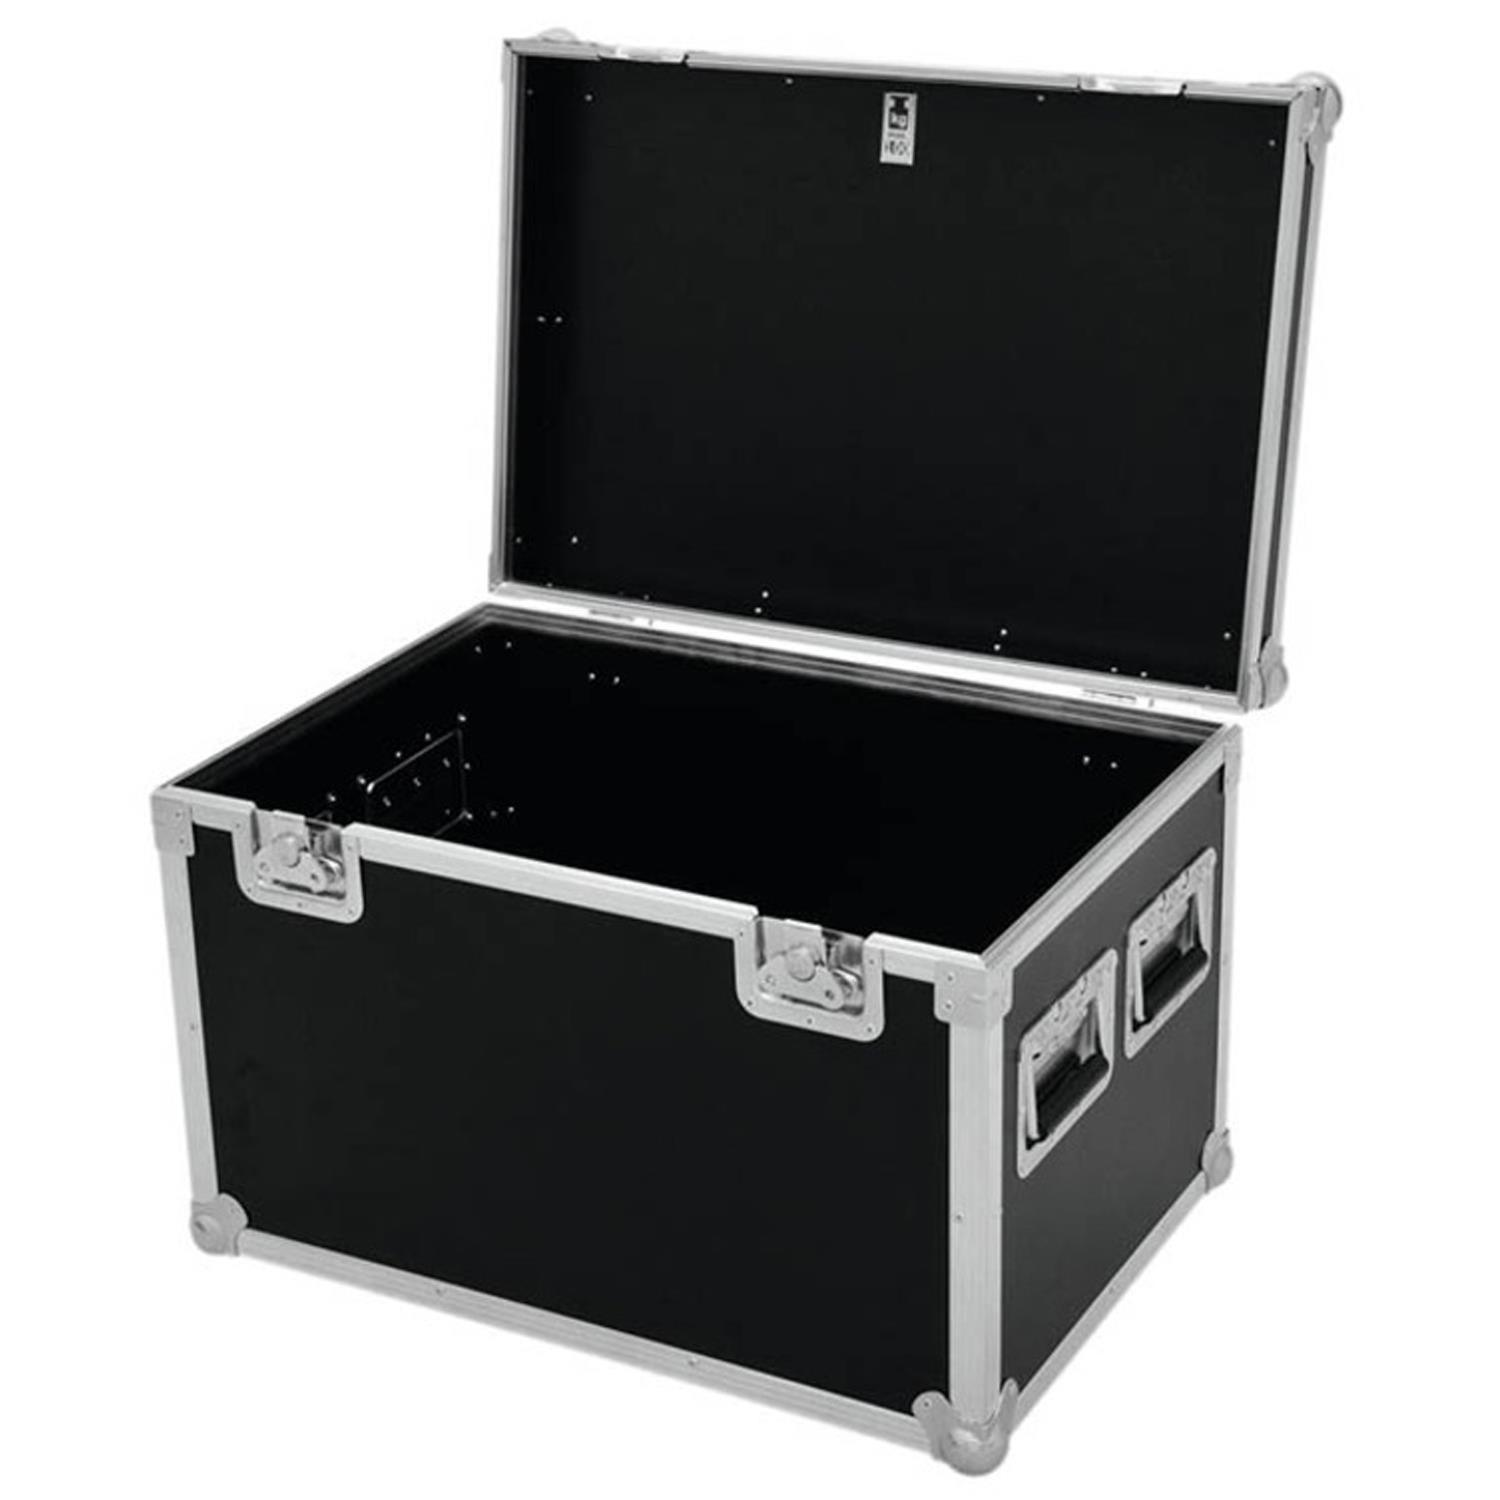 StageCore FC74 Cobra 575 x 415 x 370mm Stacking Case - DY Pro Audio